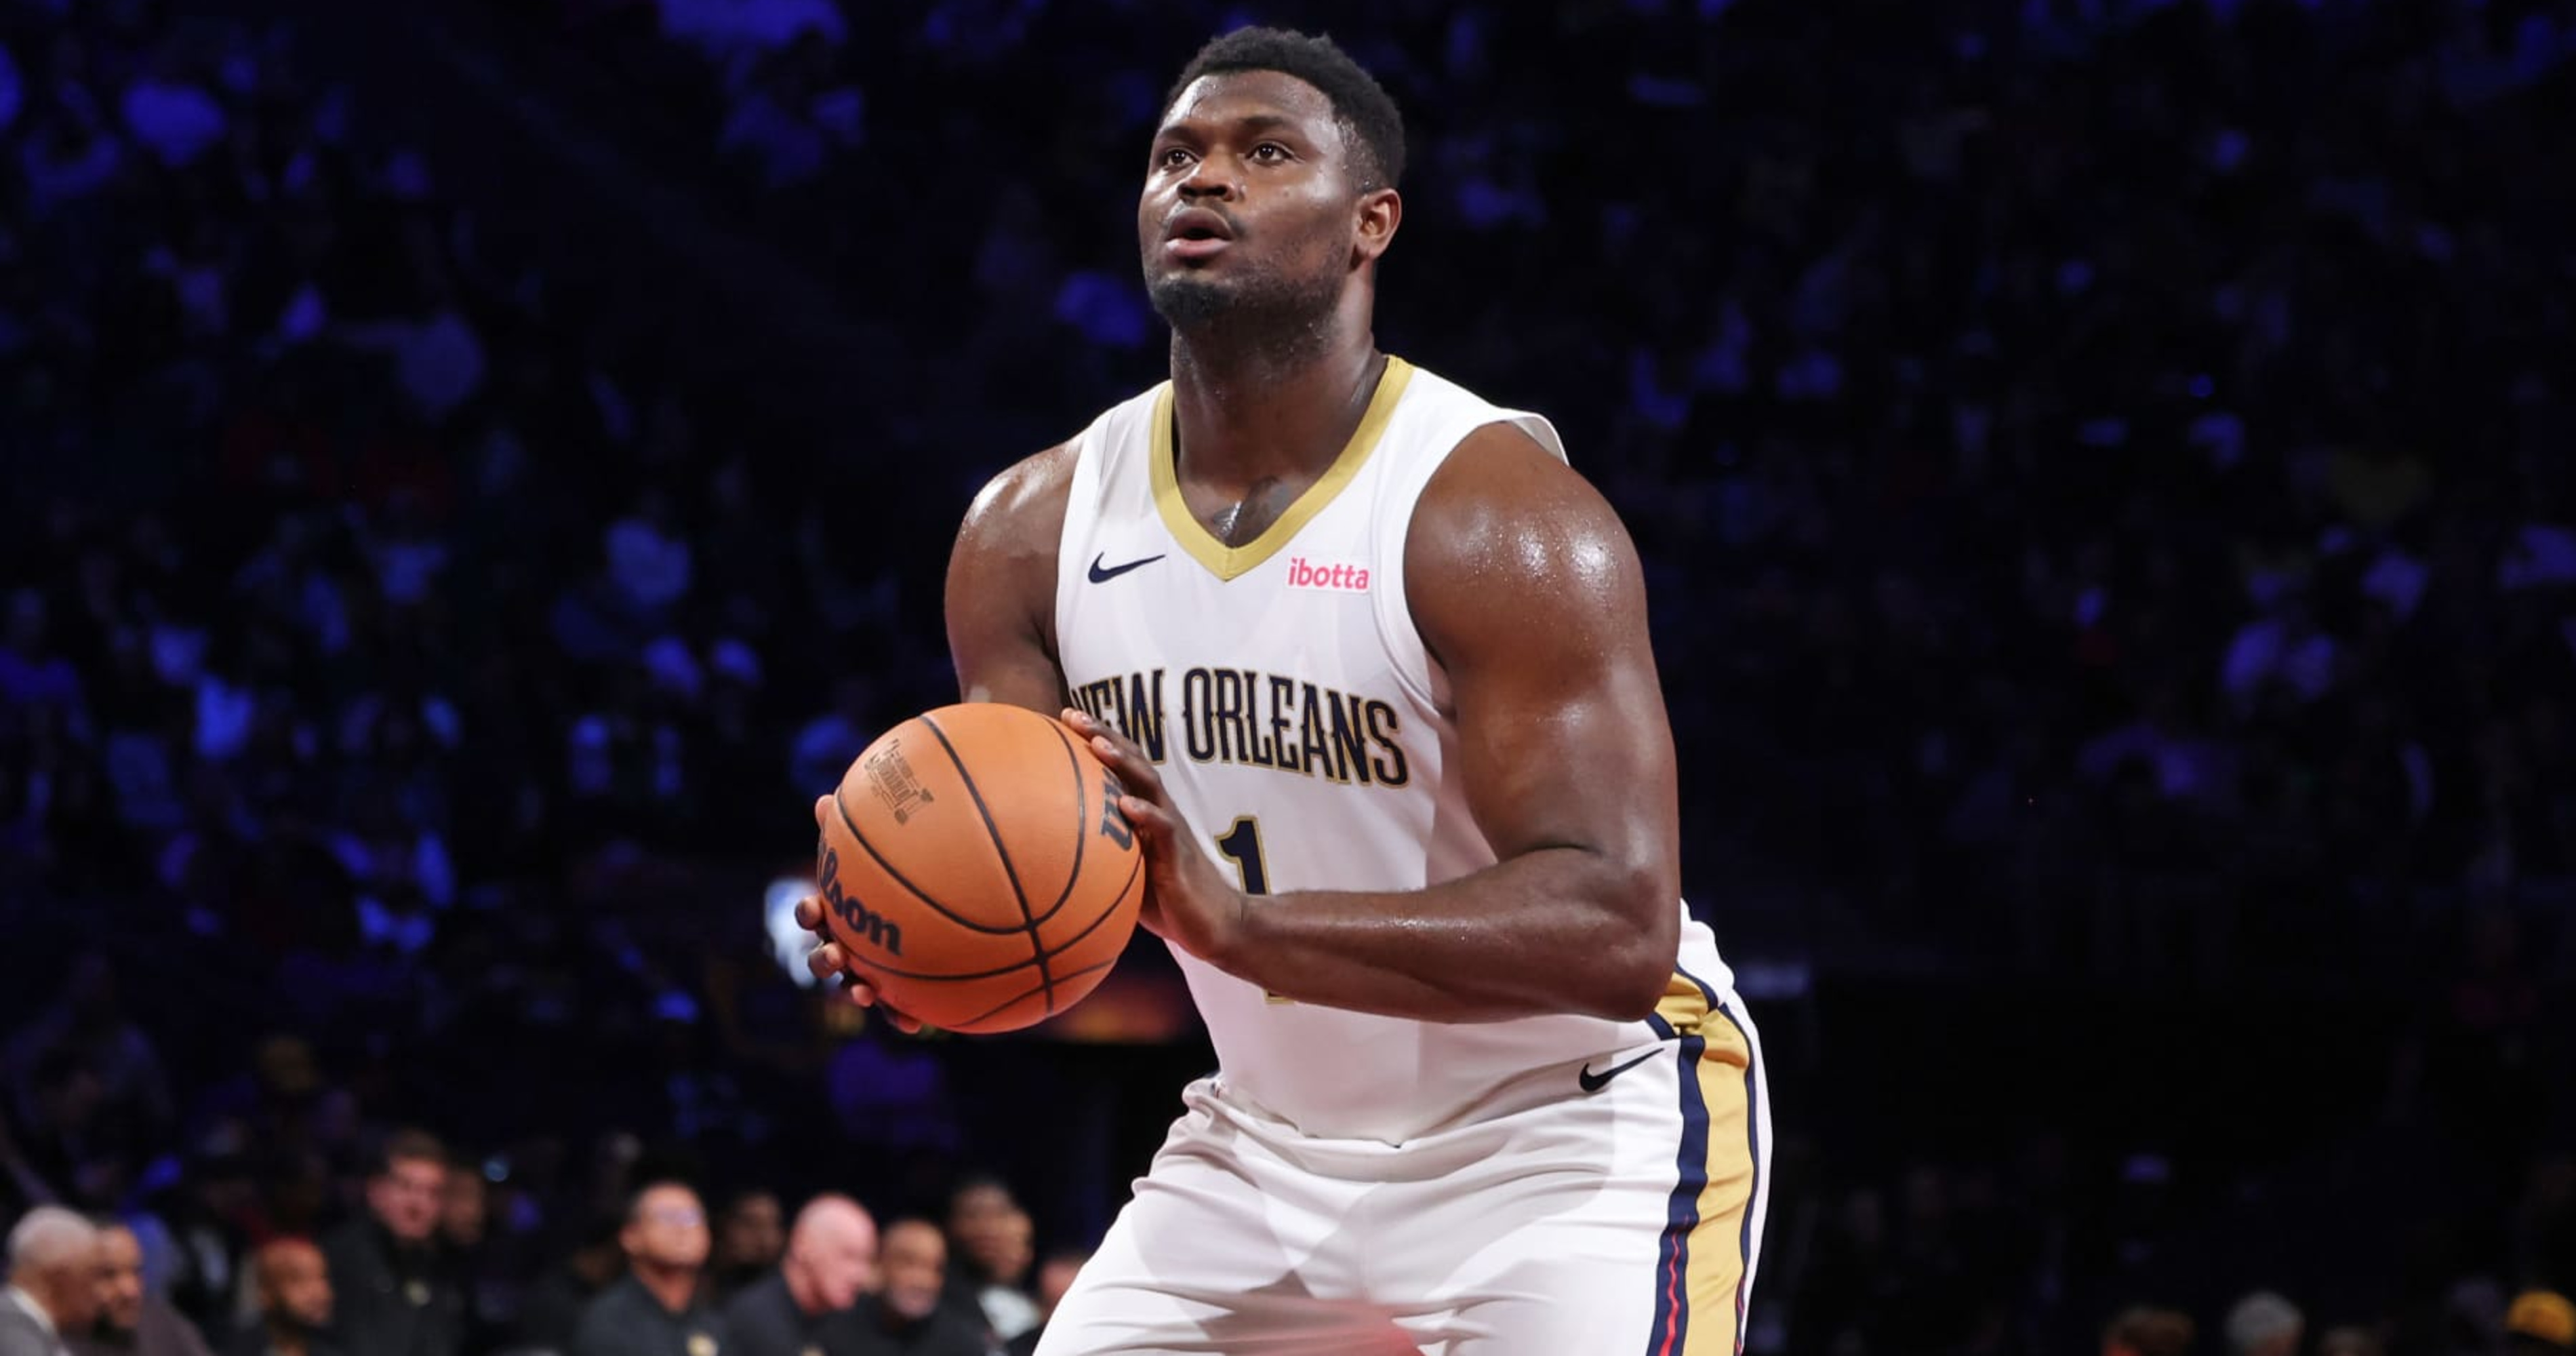 NBA Rumors: Zion Williamson Ignored Pelicans' Calls for Improved Diet, Conditioning